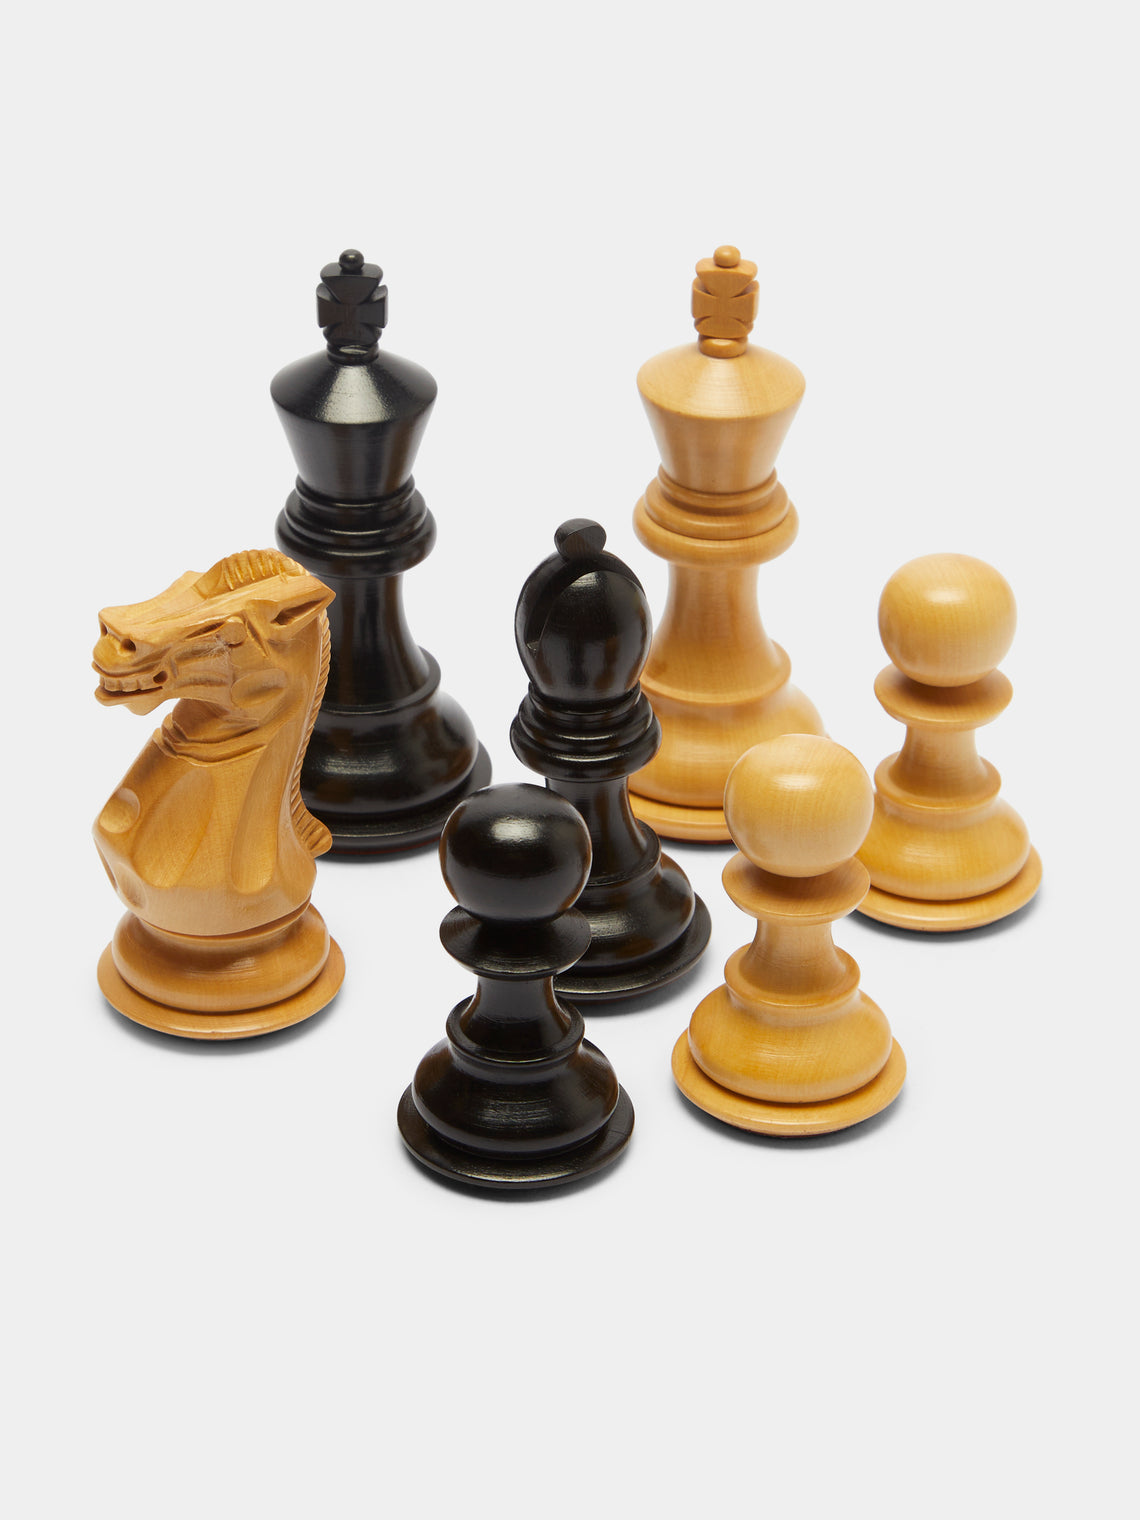 Linley - Mayfair Wood and Leather Tabletop Chess Set - Brown - ABASK